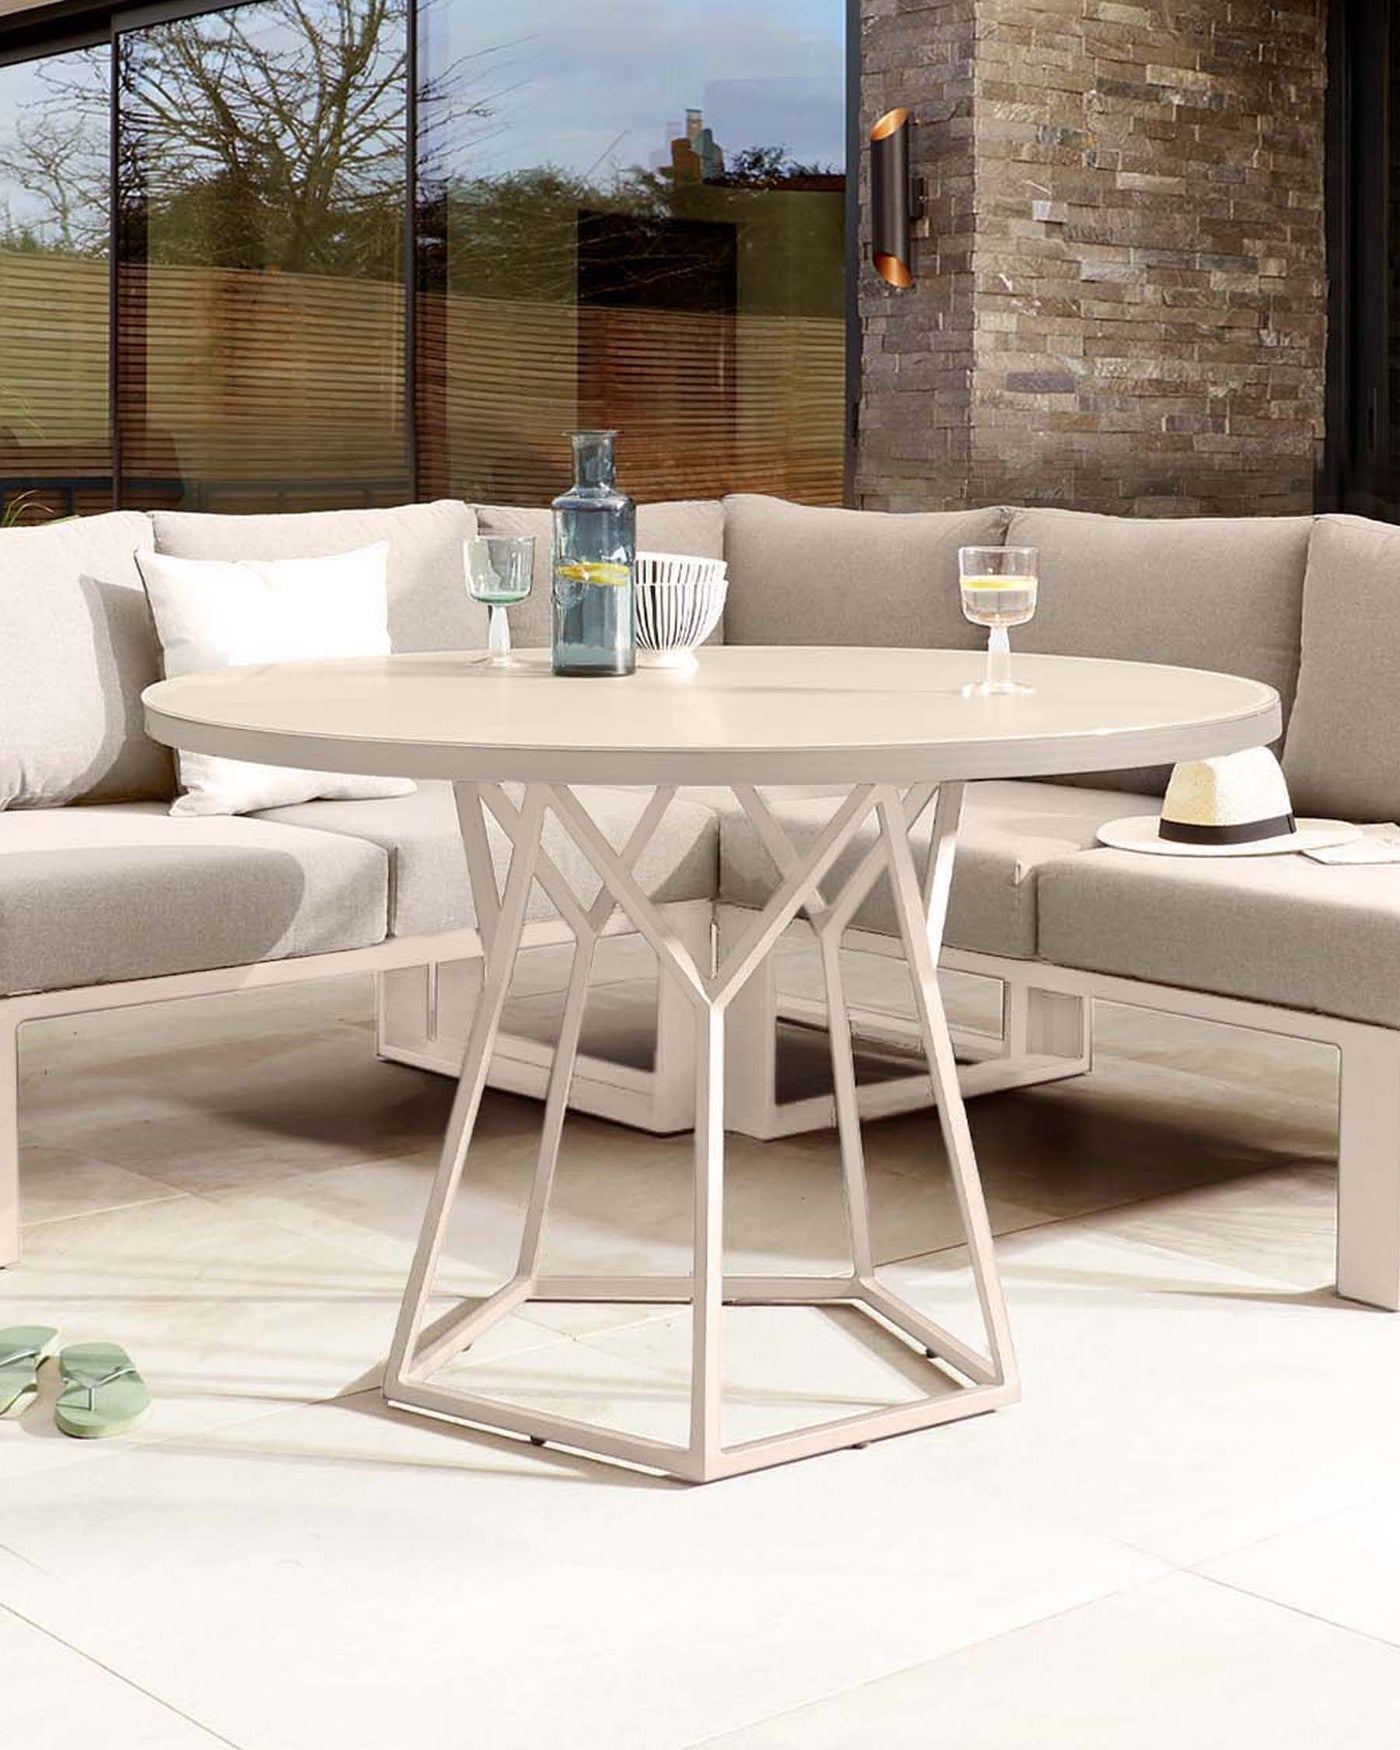 Modern outdoor furniture set featuring a round beige table with a unique geometric base and a matching L-shaped sectional sofa with plush cushions and pillows, staged on an elegant patio.